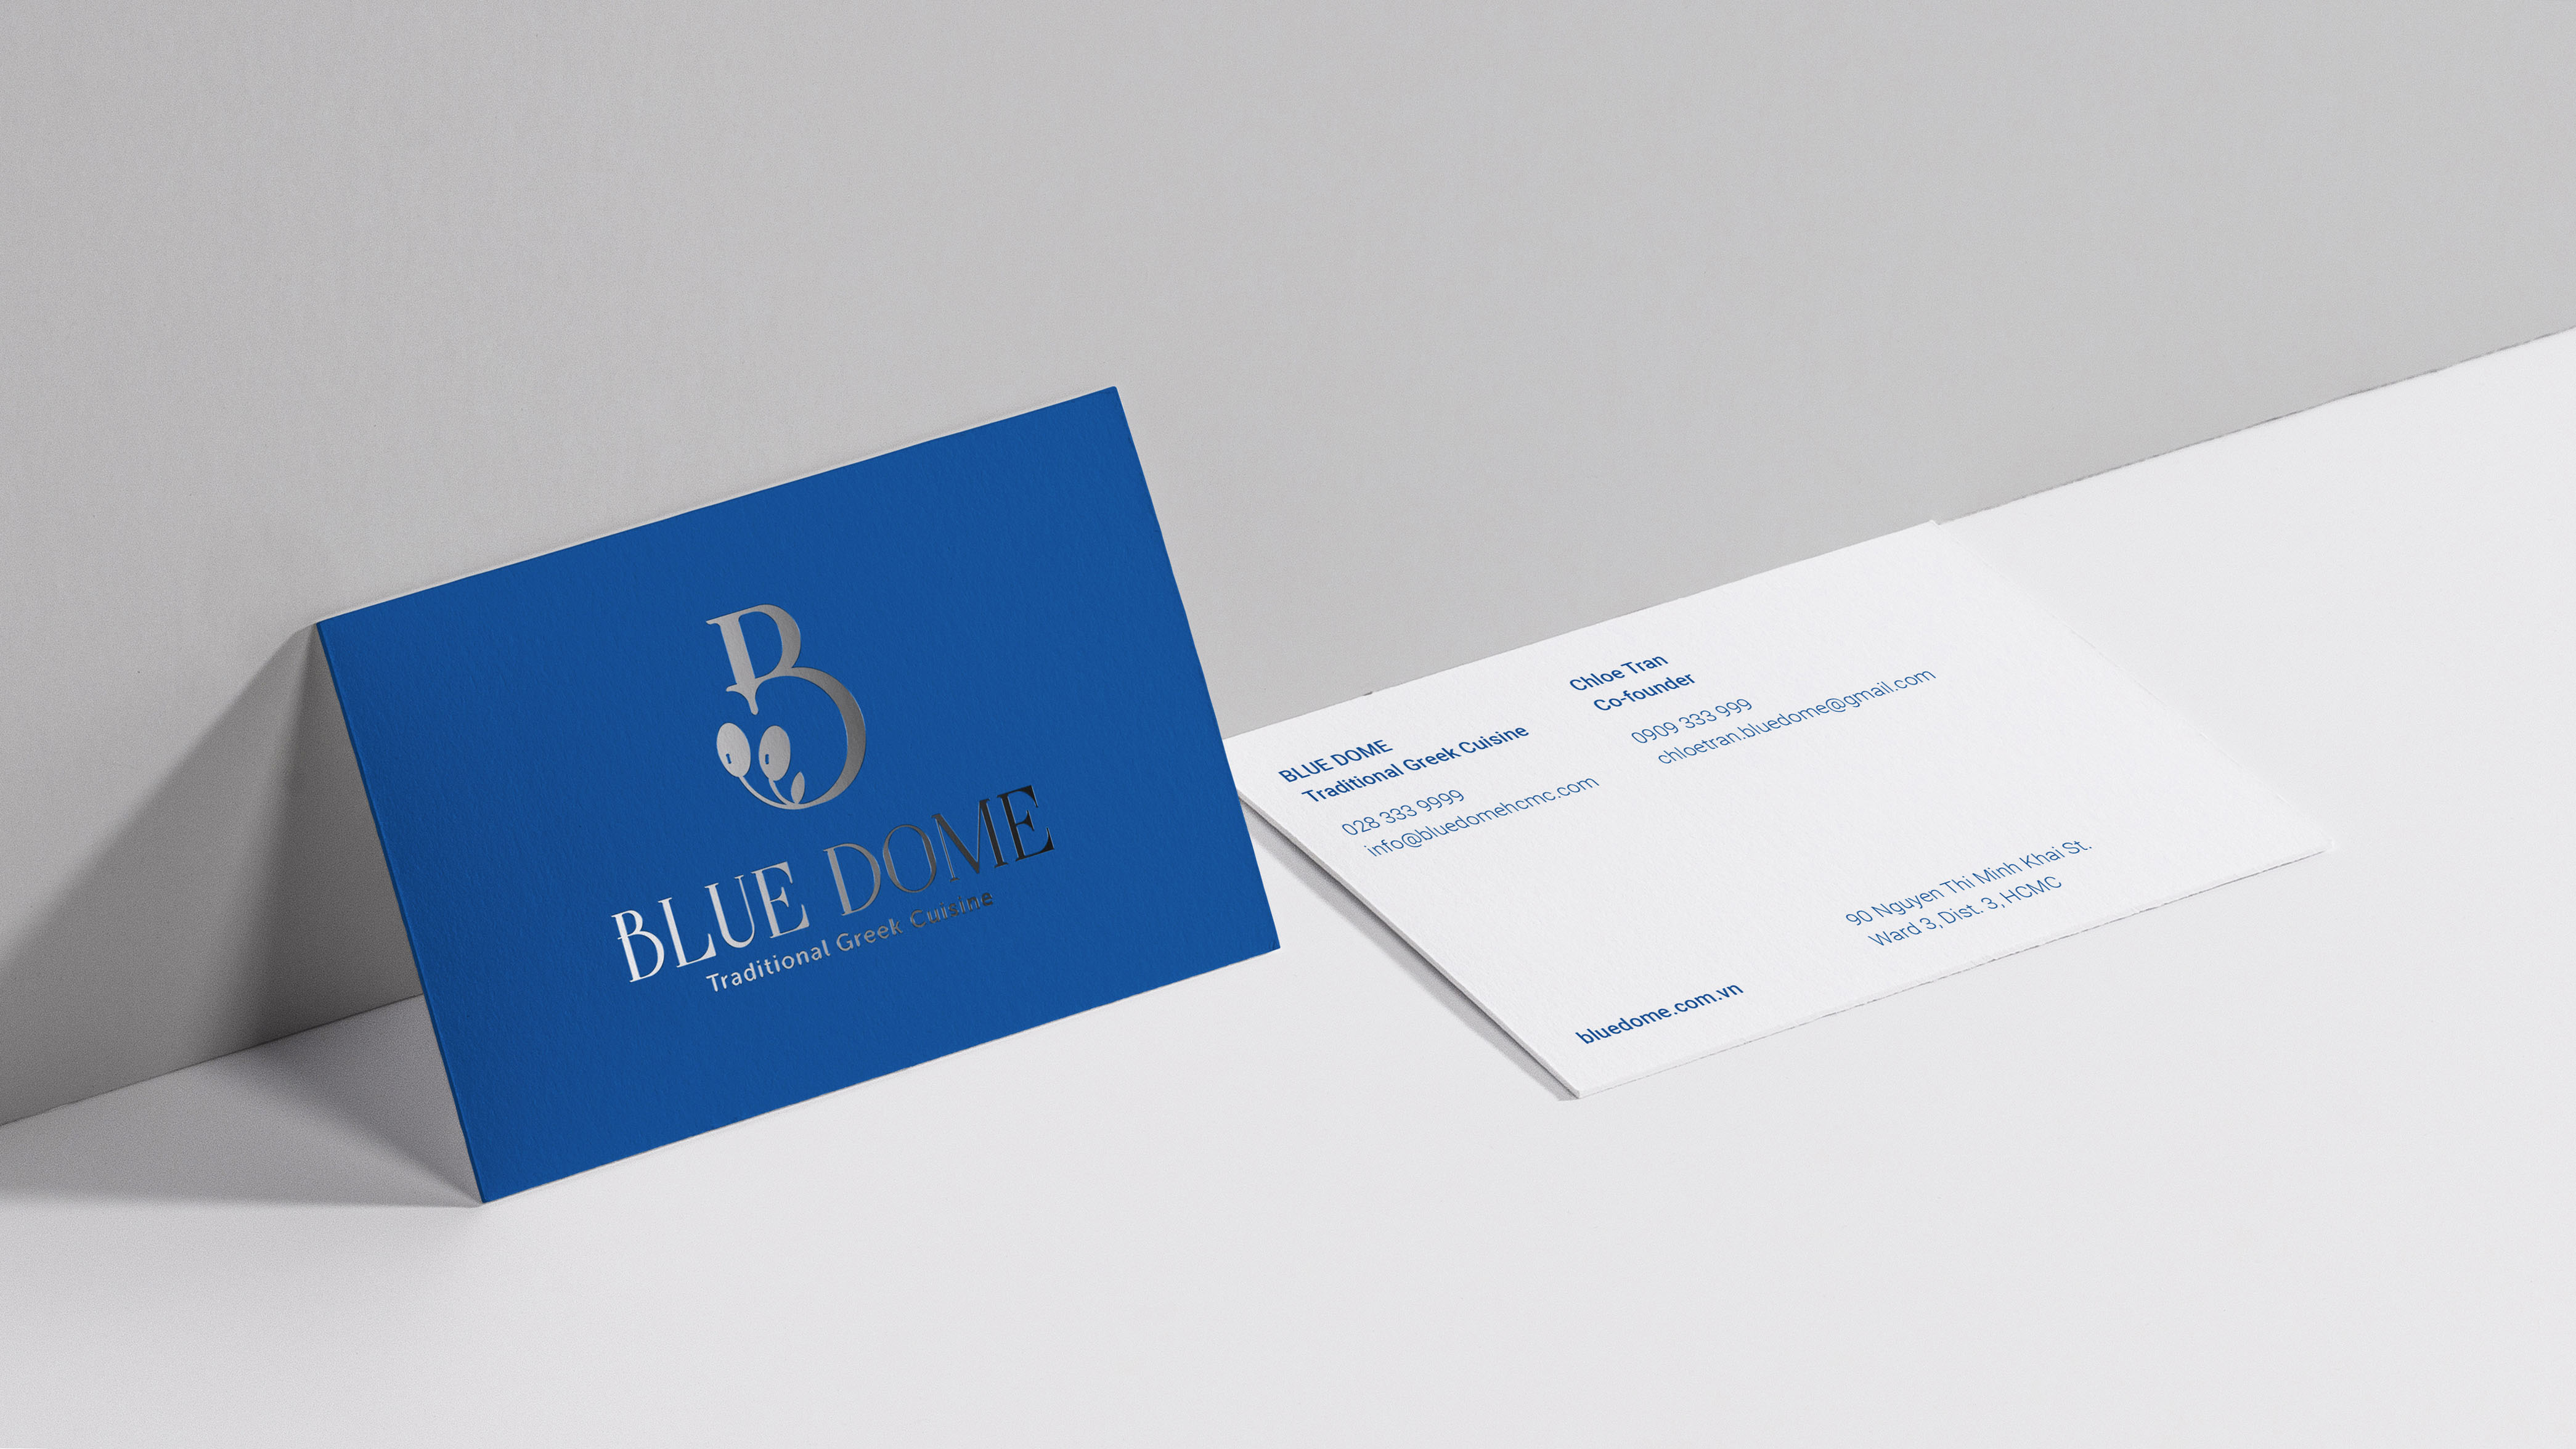 Blue Dome Traditional Greek Cuisine Branding by Son Nguyen